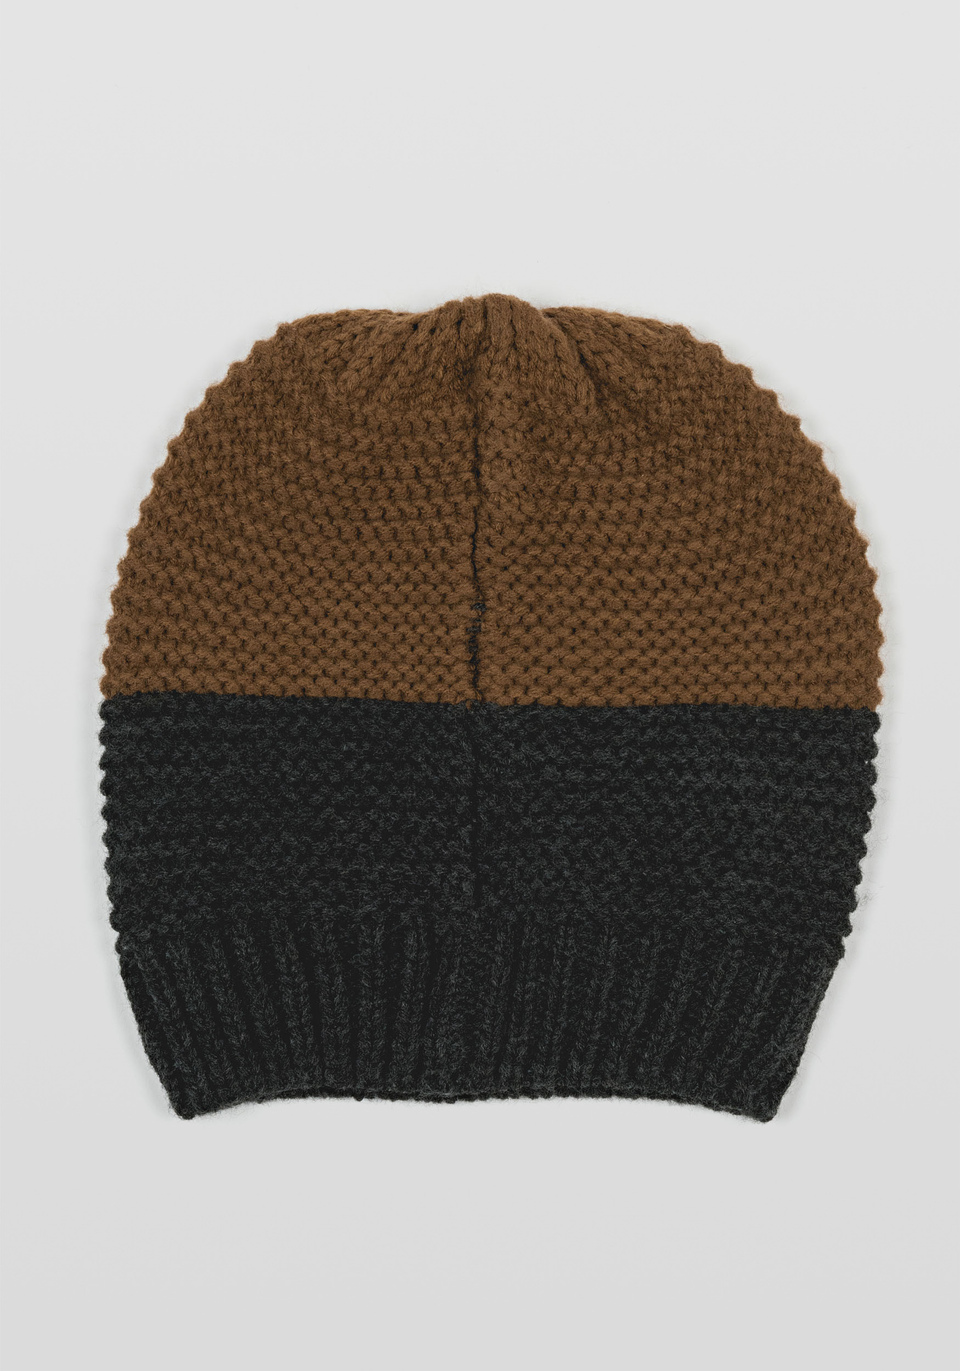 TWO-TONE KNITTED BEANIE - Antony Morato Online Shop